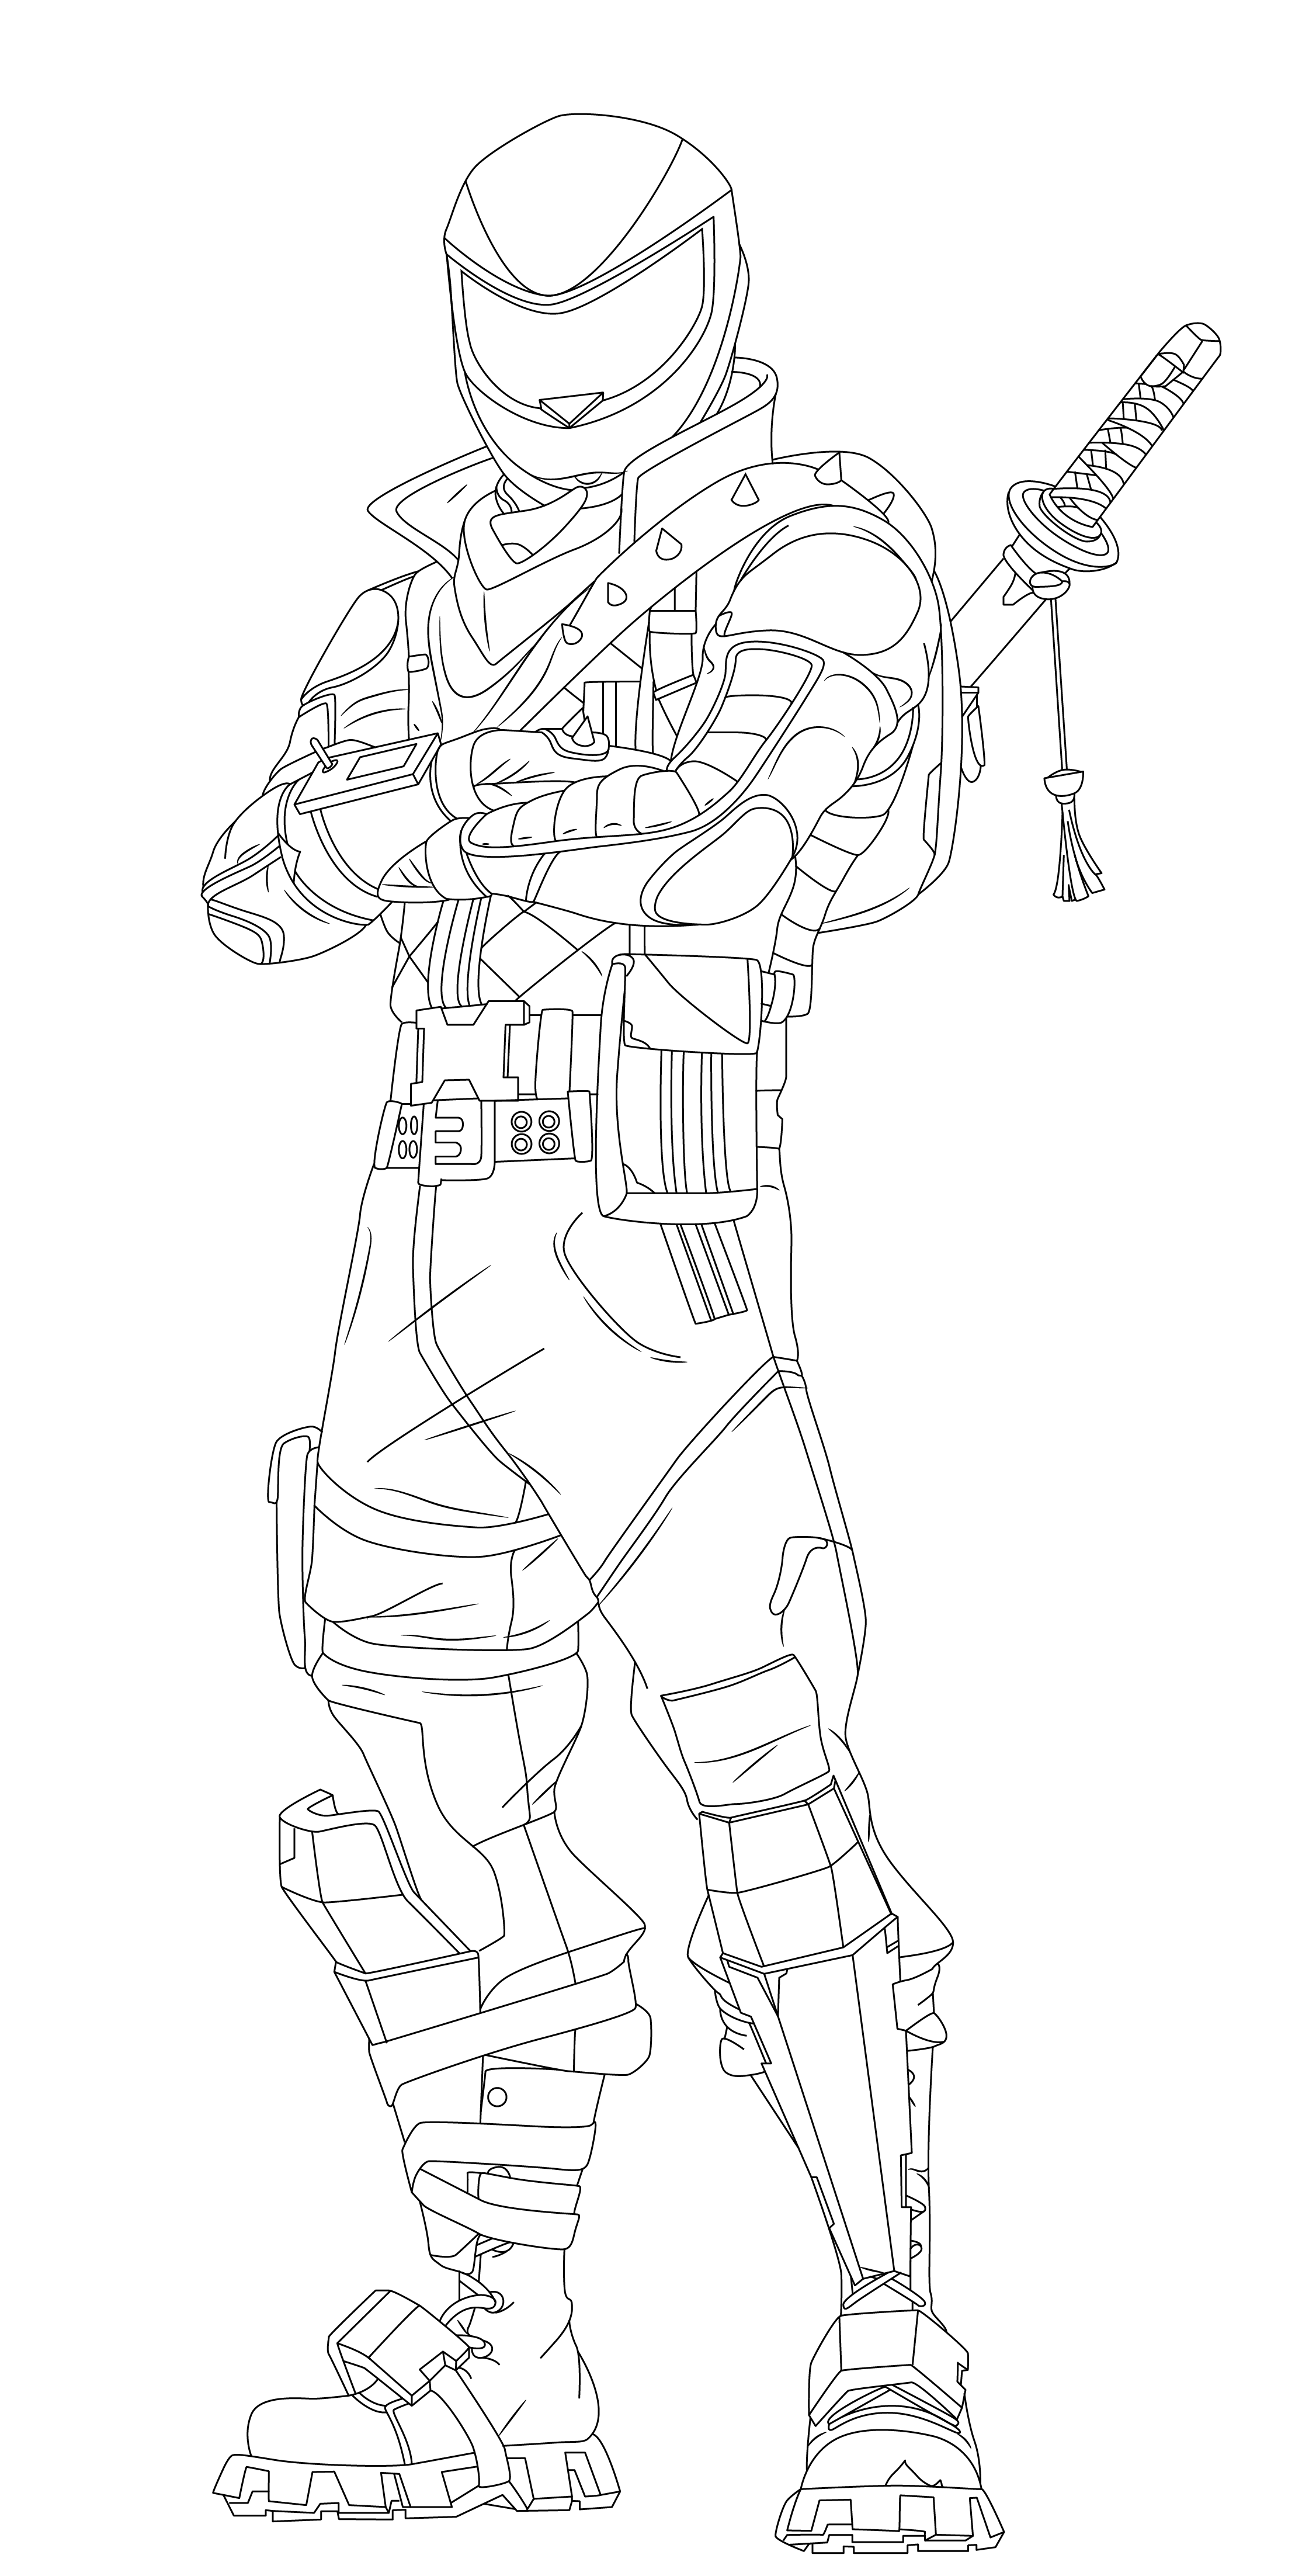 Overtaker Fortnite Hd Coloring Page